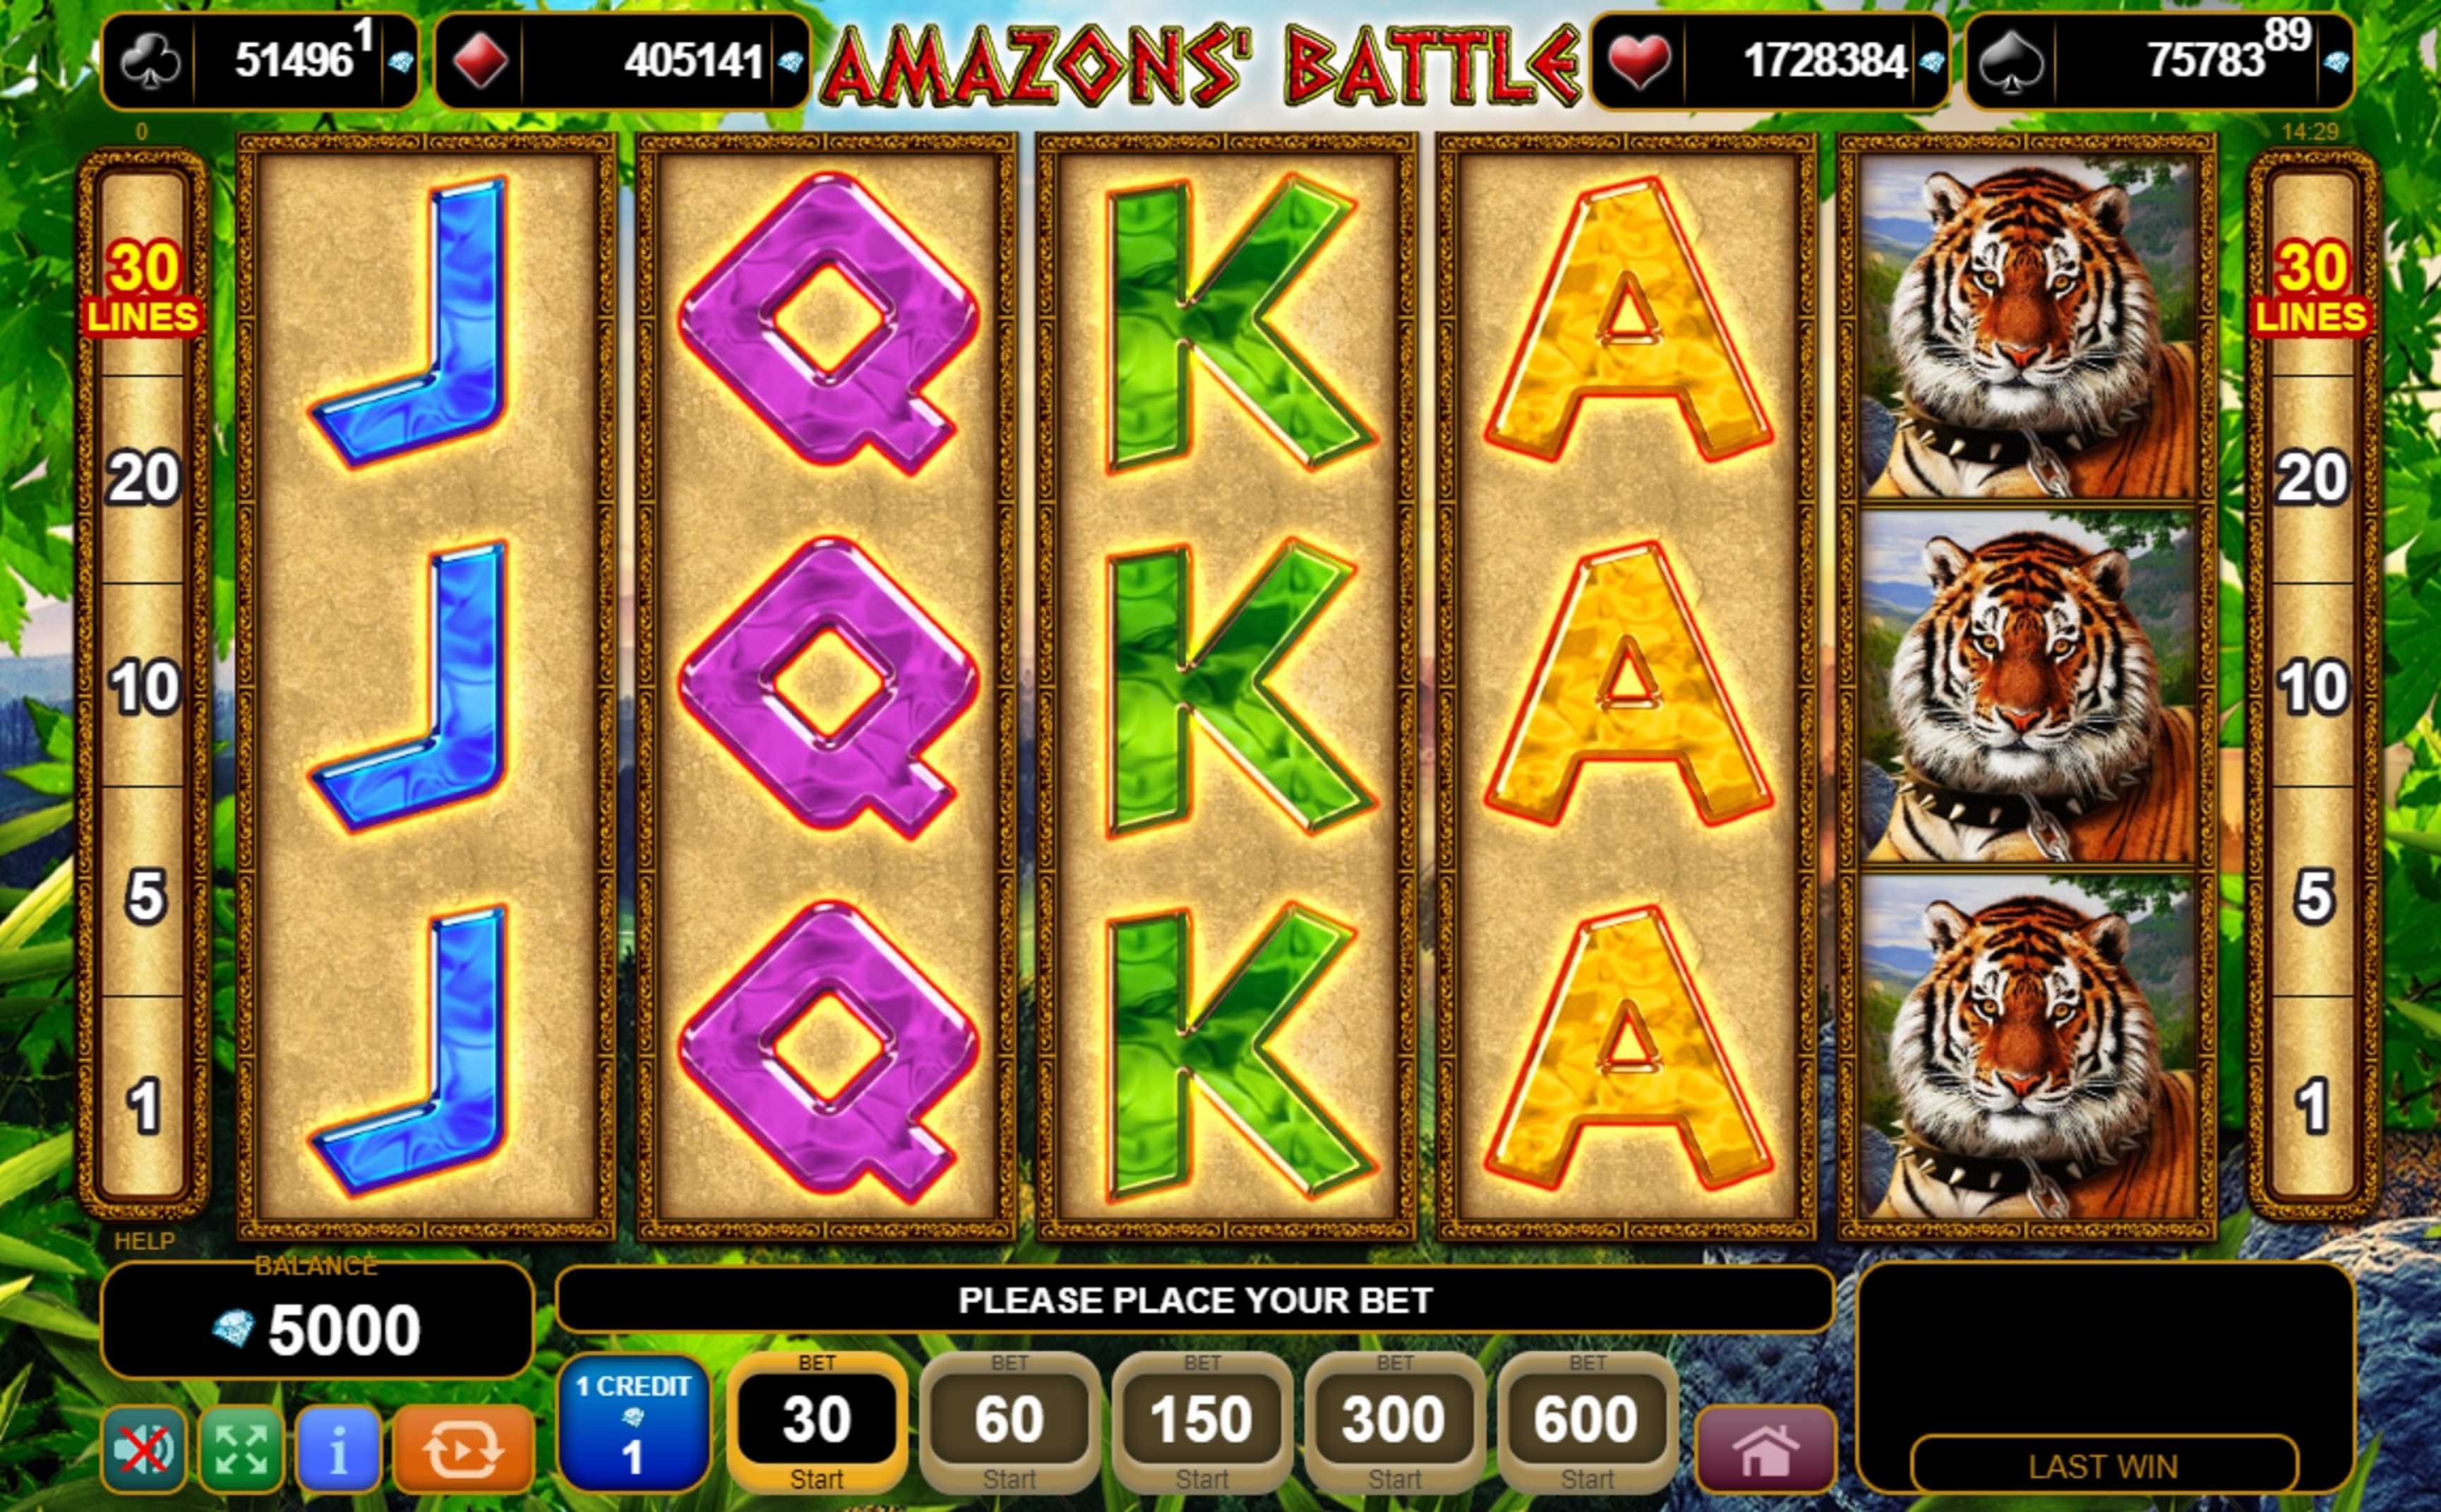 Reels in Amazons' Battle Slot Game by EGT